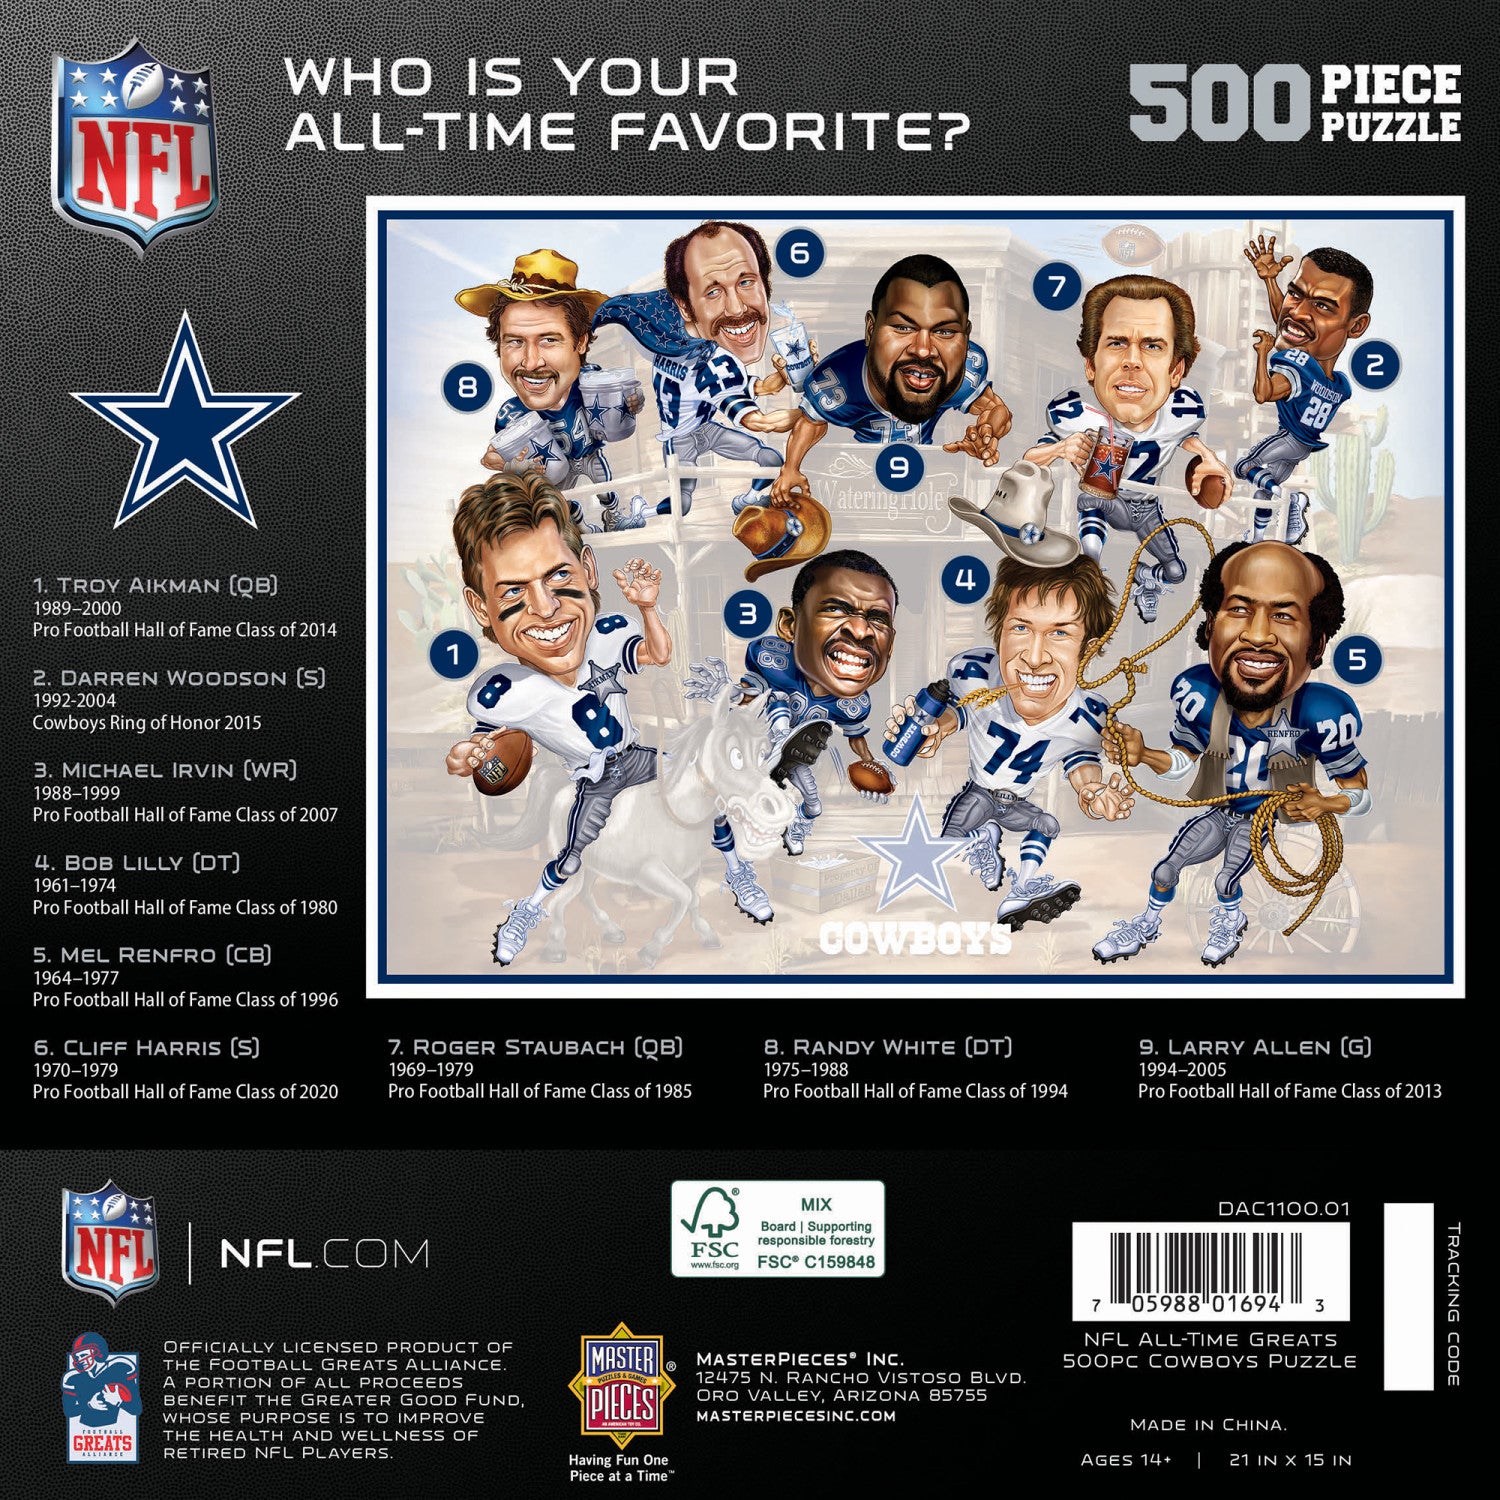 Dallas Cowboys - All Time Greats 500 Piece Jigsaw Puzzle